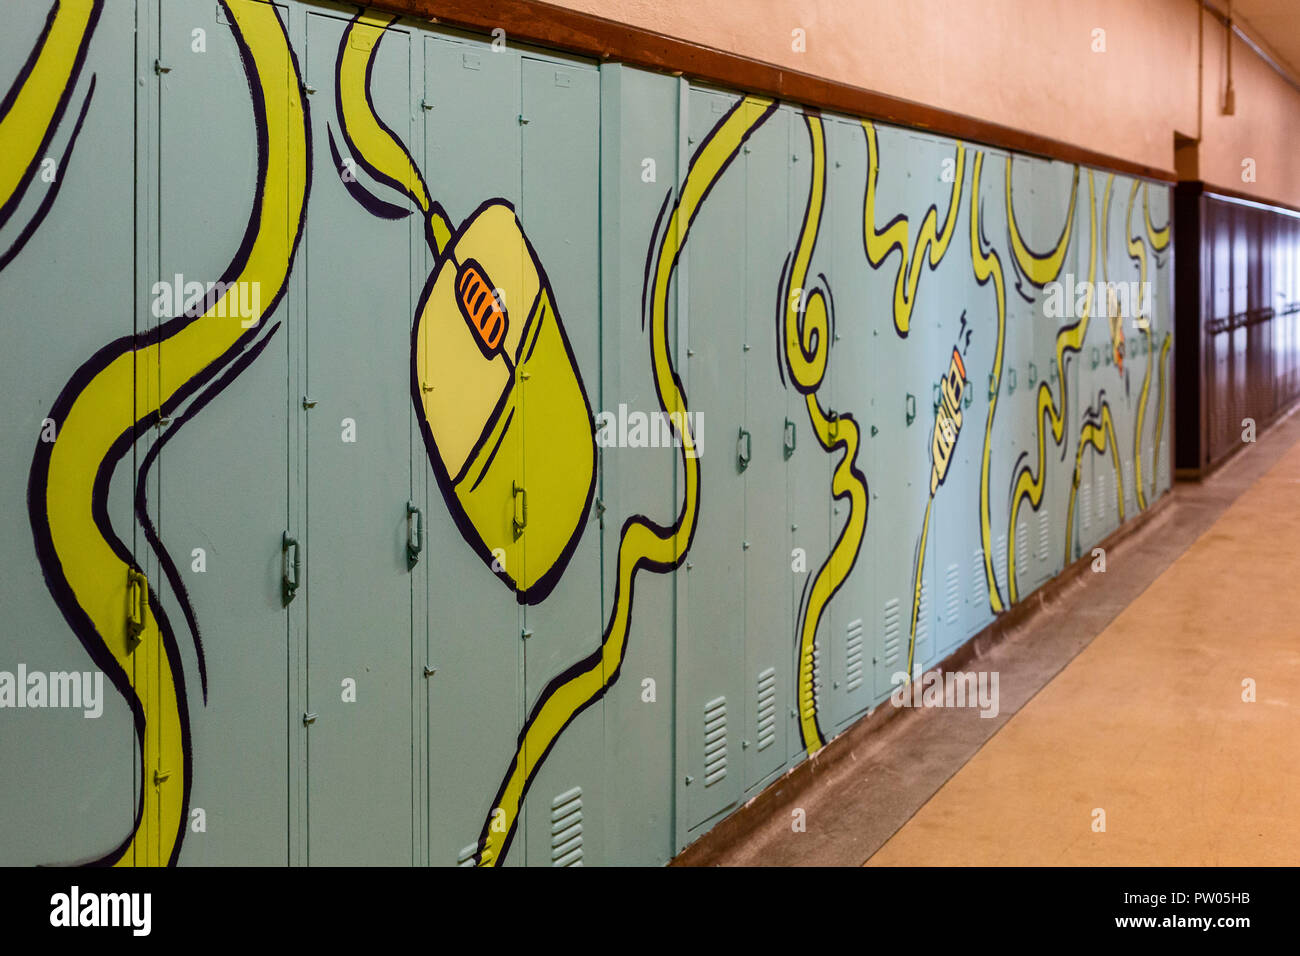 Detroit, Michigan - Art work on lockers in the old Durfee Elementary-Middle School. Stock Photo